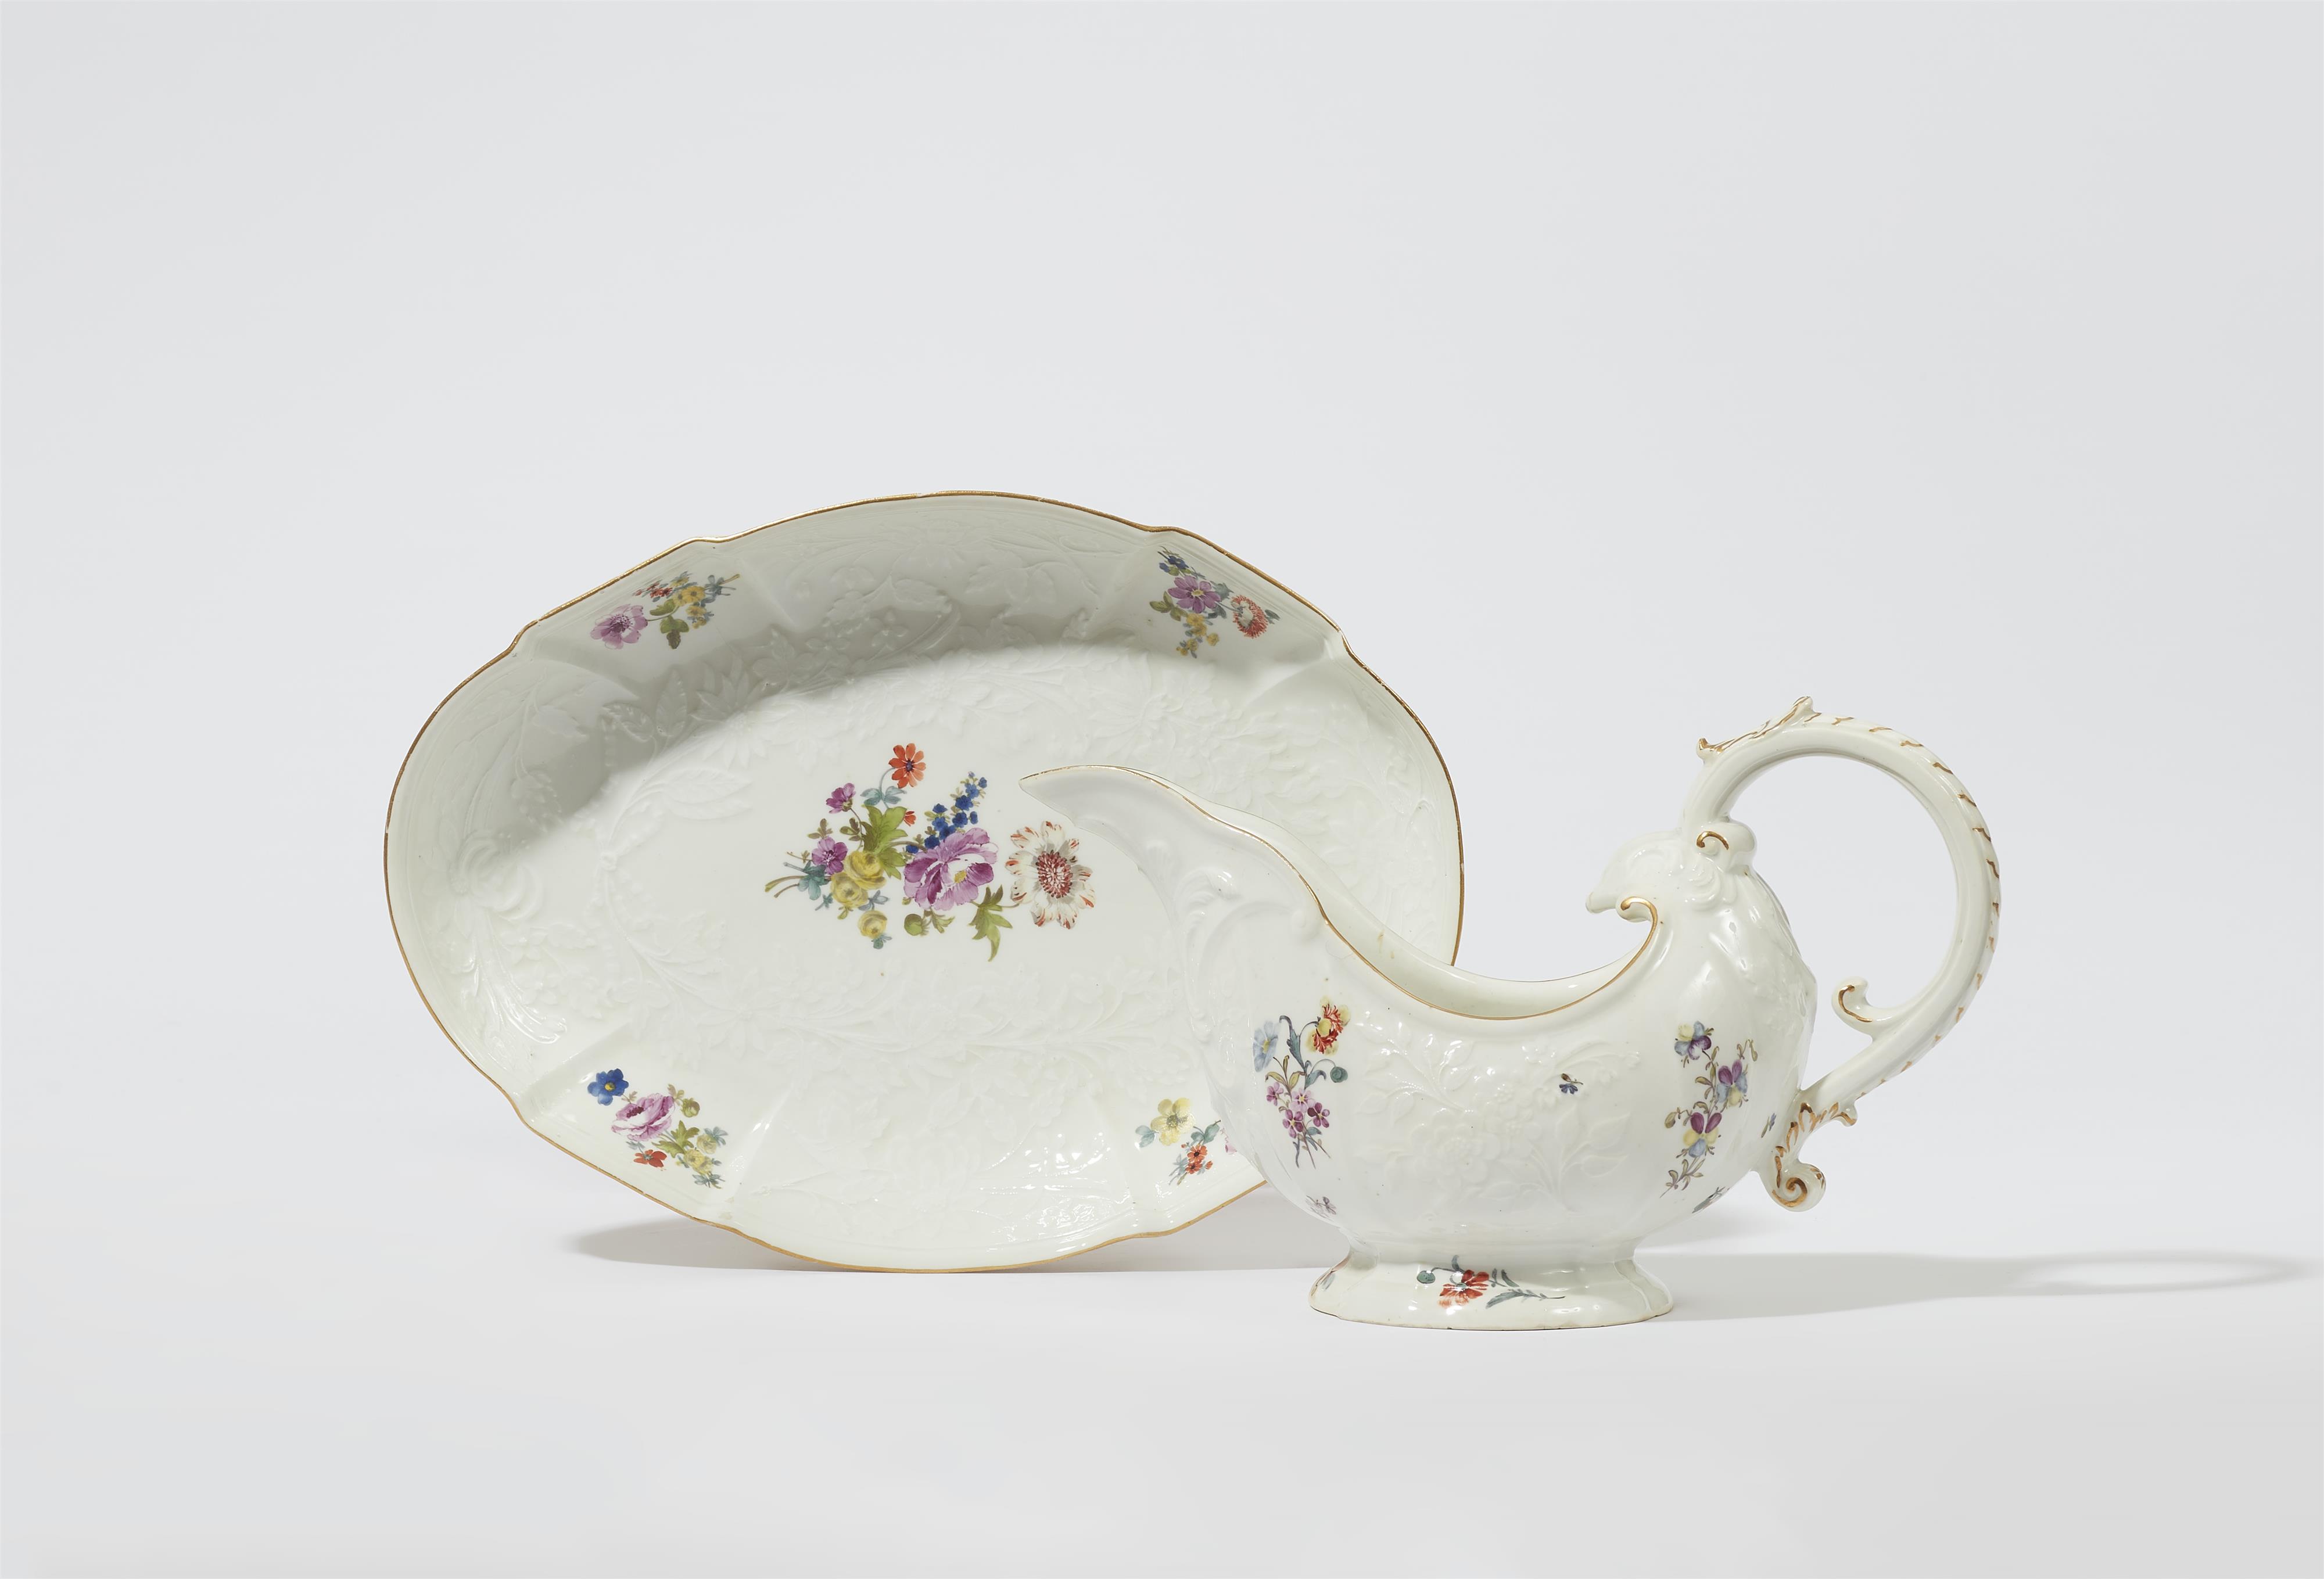 A Meissen porcelain sauce boat and dish from a dinner service with floral decor - image-1